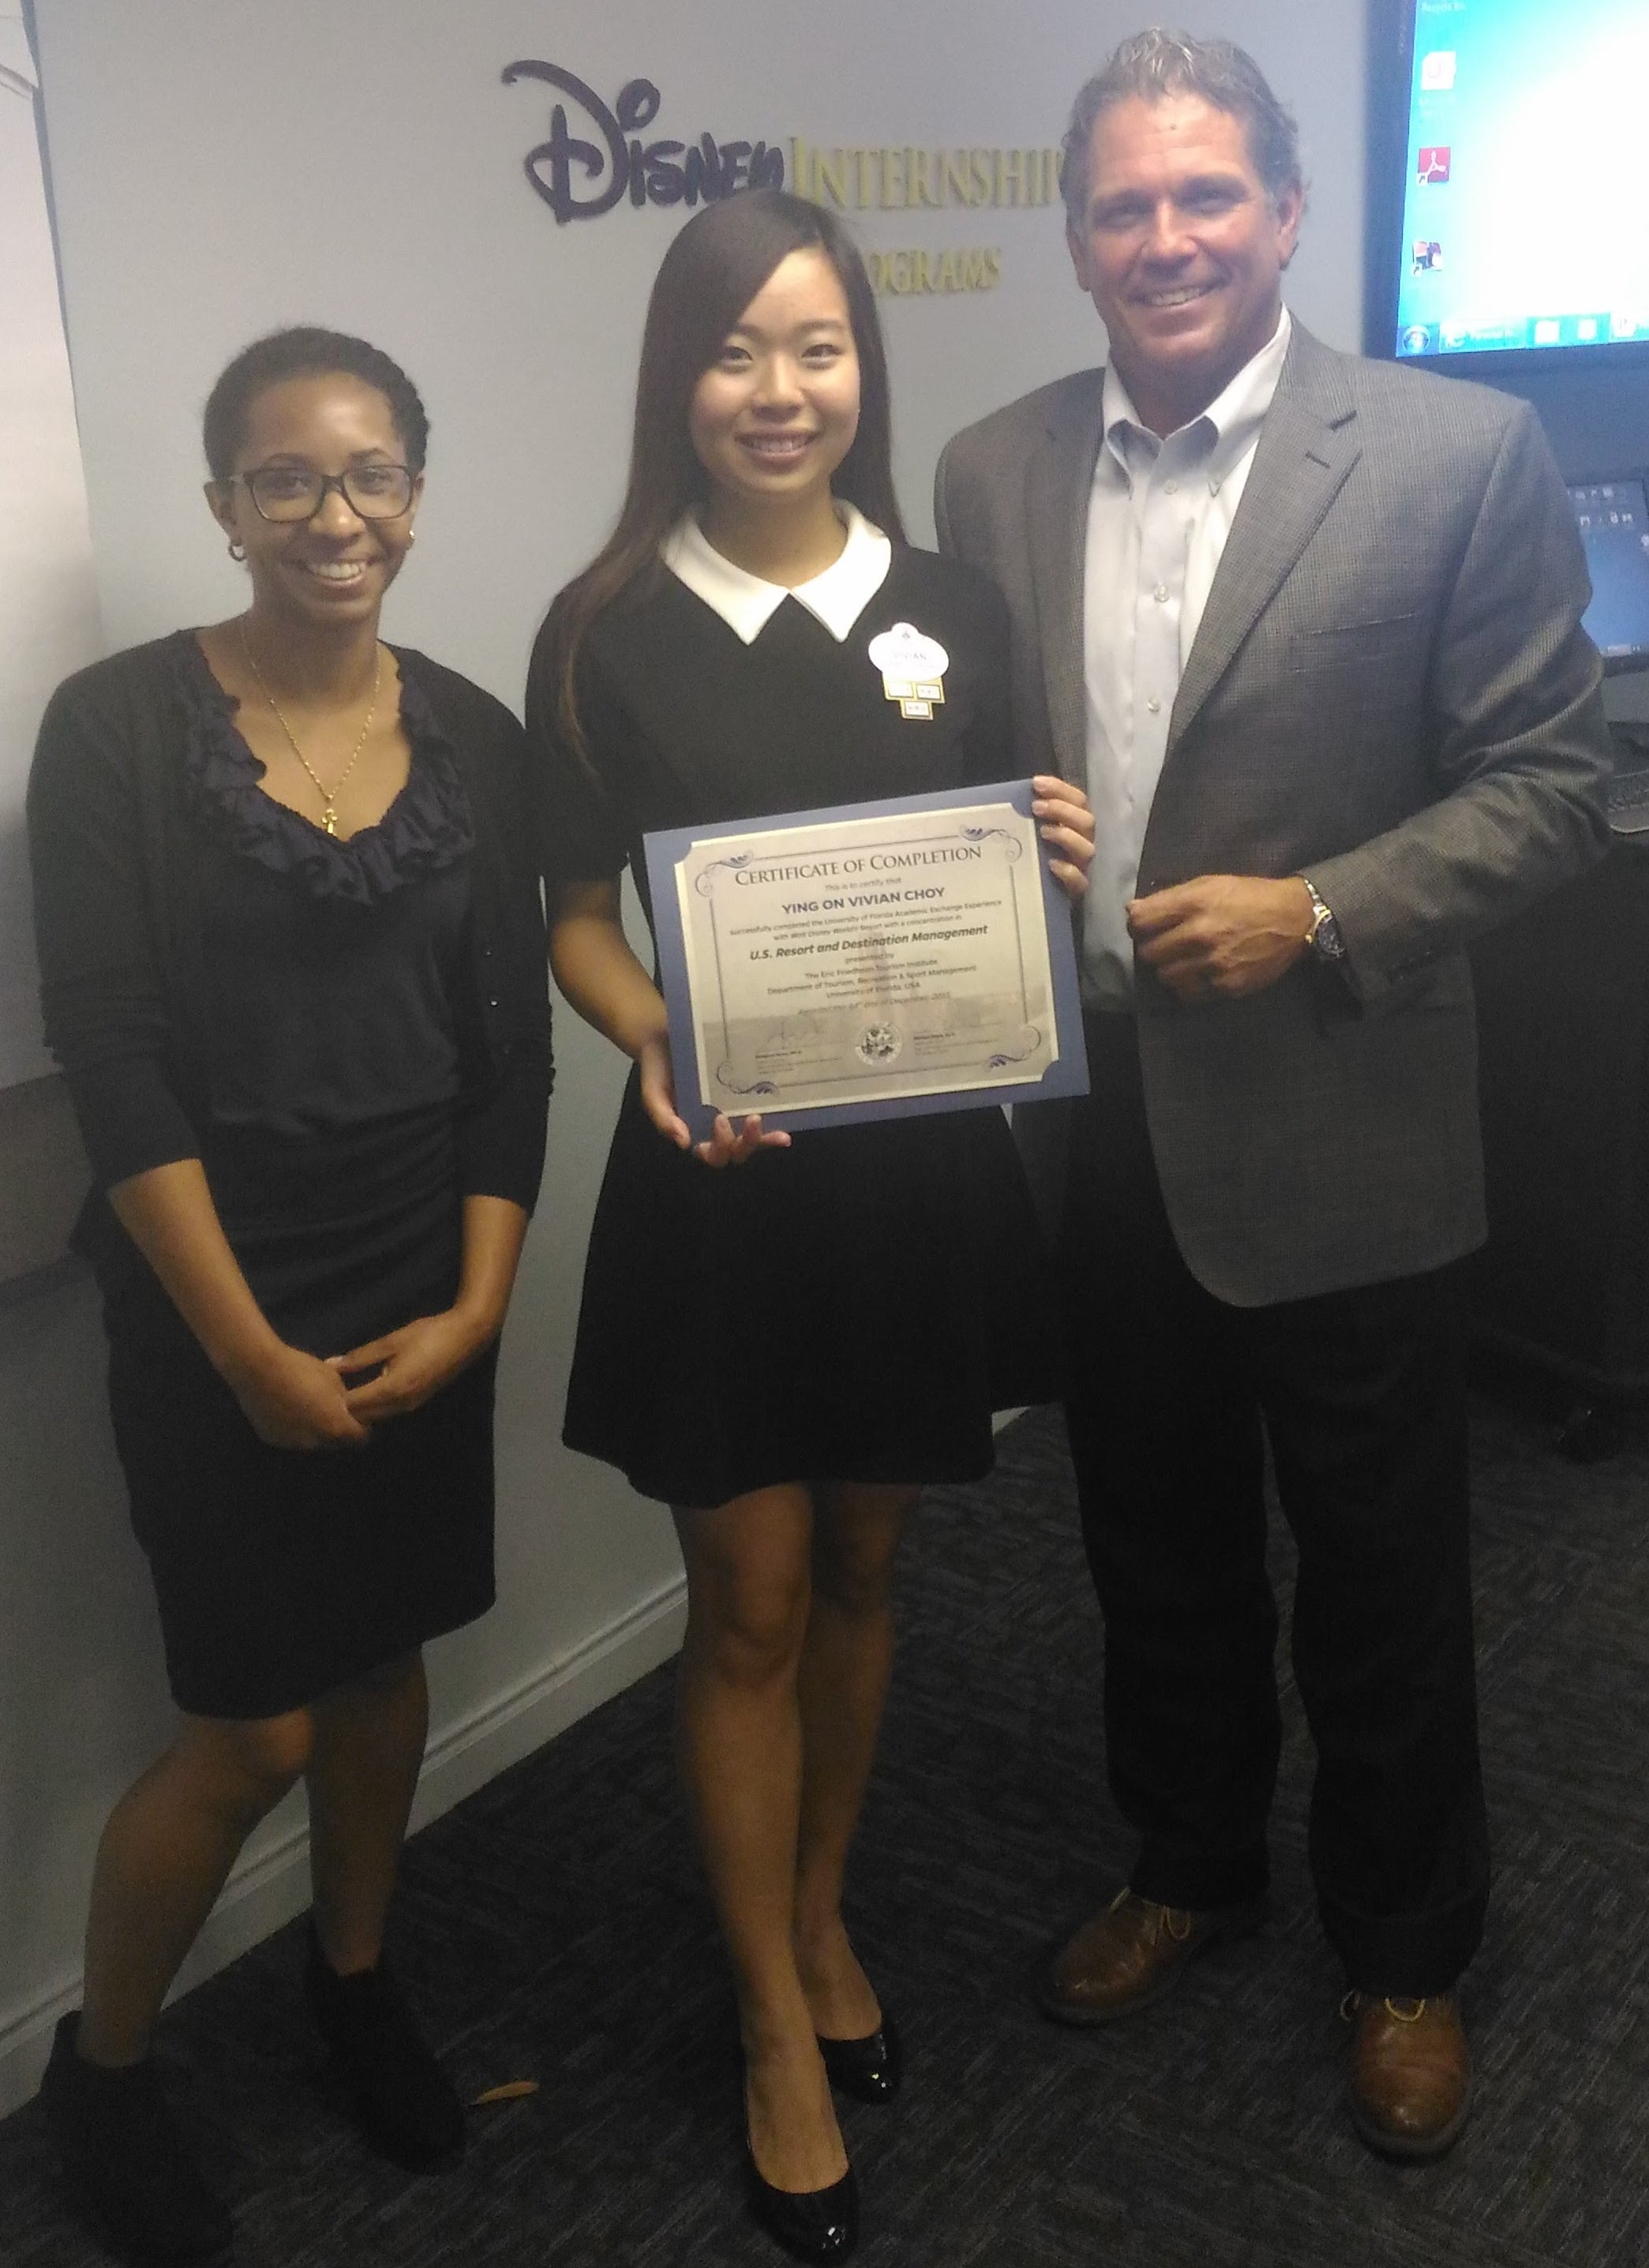 Vivian with a Disney internship certificate of completion